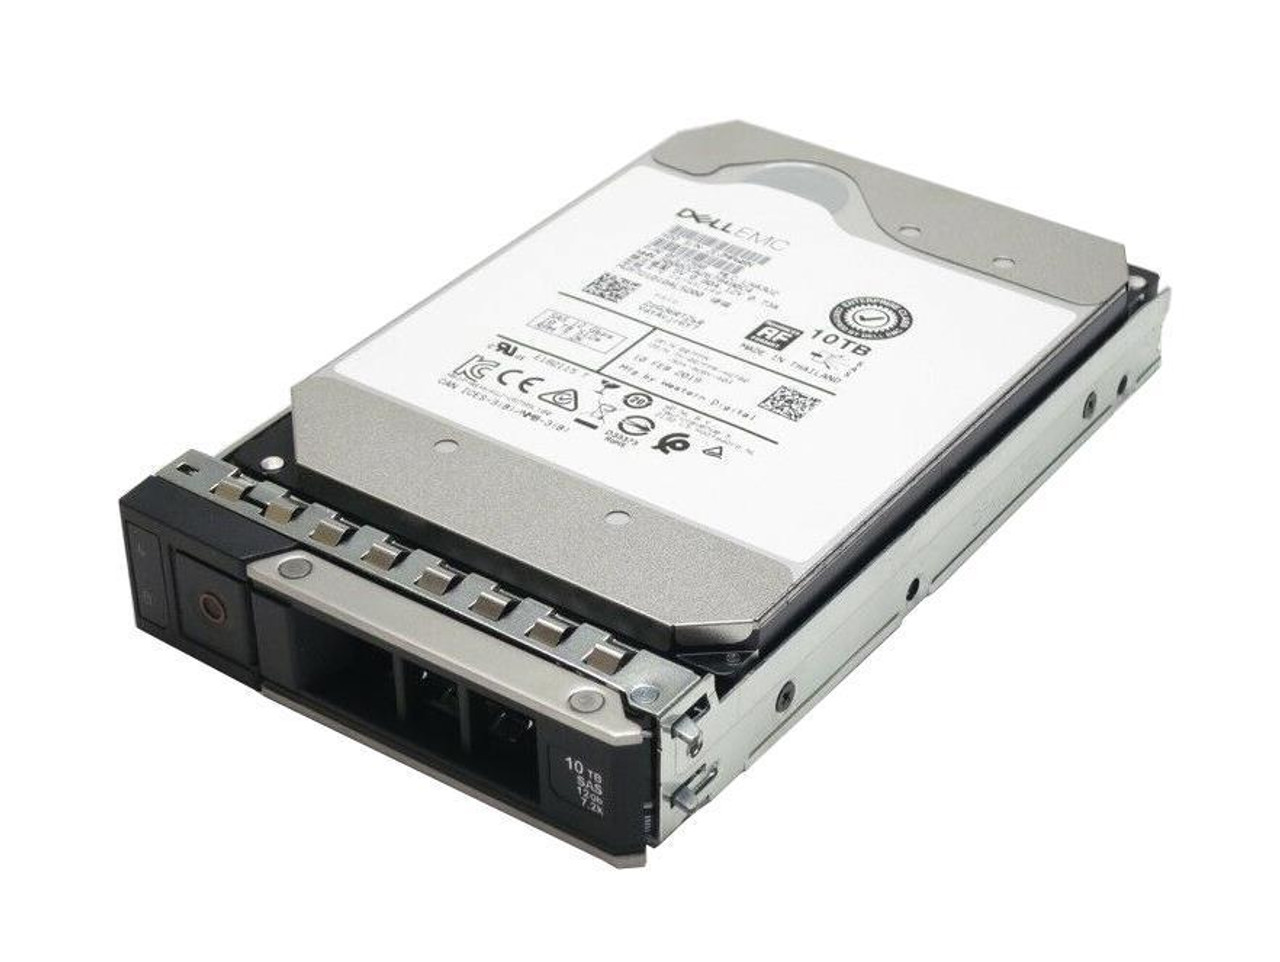 400-ANVD Dell 10TB 7200RPM SAS 12Gbps Nearline 3.5-inch Internal Hard Drive with Tray